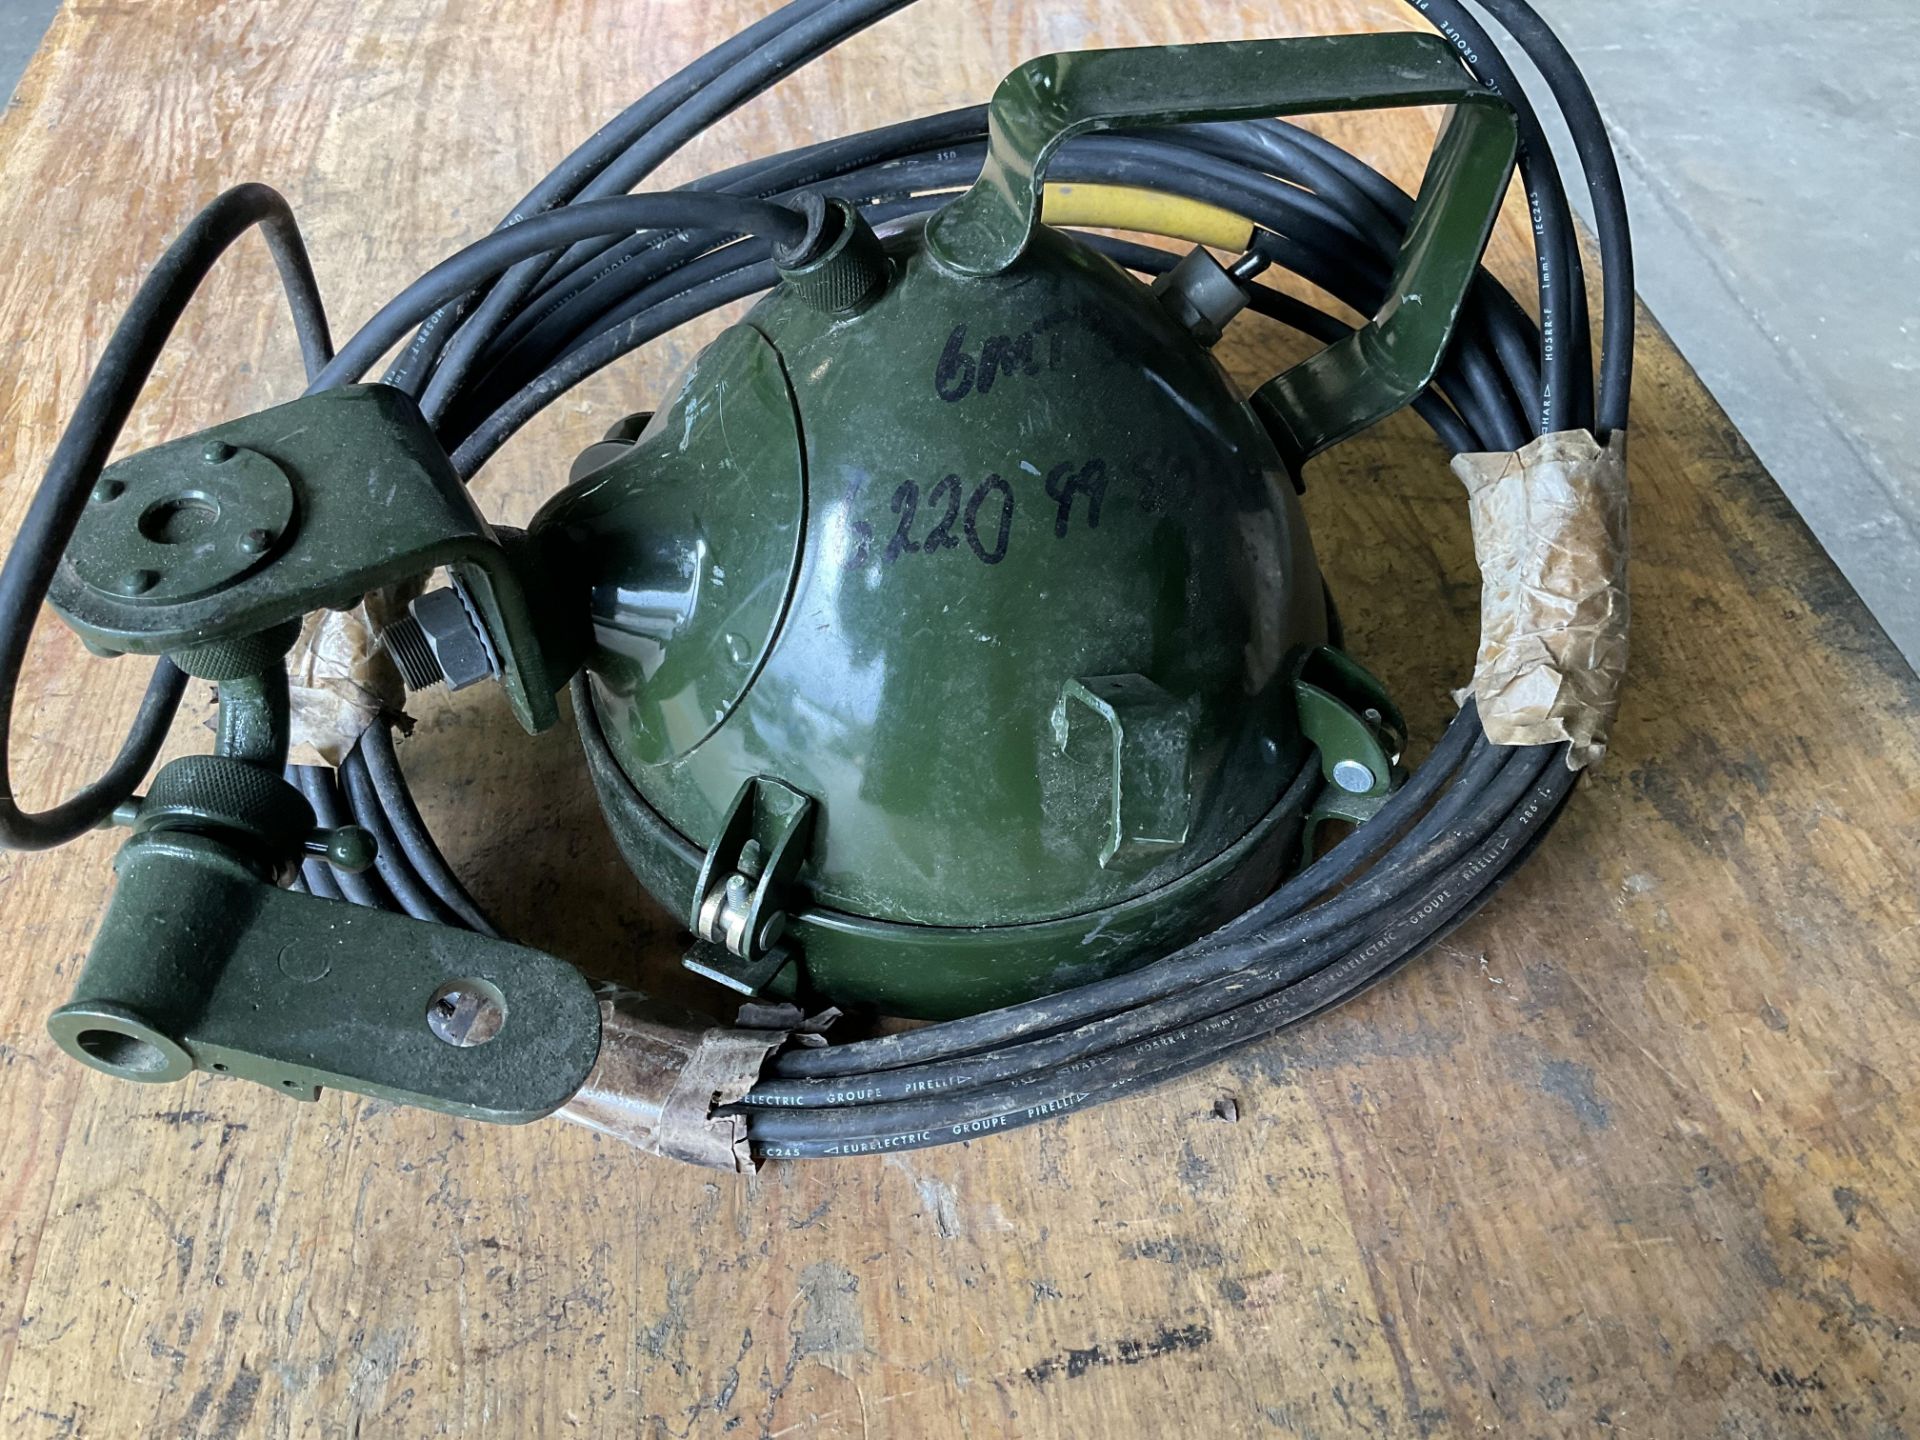 1X NOS FRANCIS FV SEARCH LIGHT C/ W LEAD AND BRACKET LAND ROVER, FERRET, ETC, ETC - Image 3 of 3